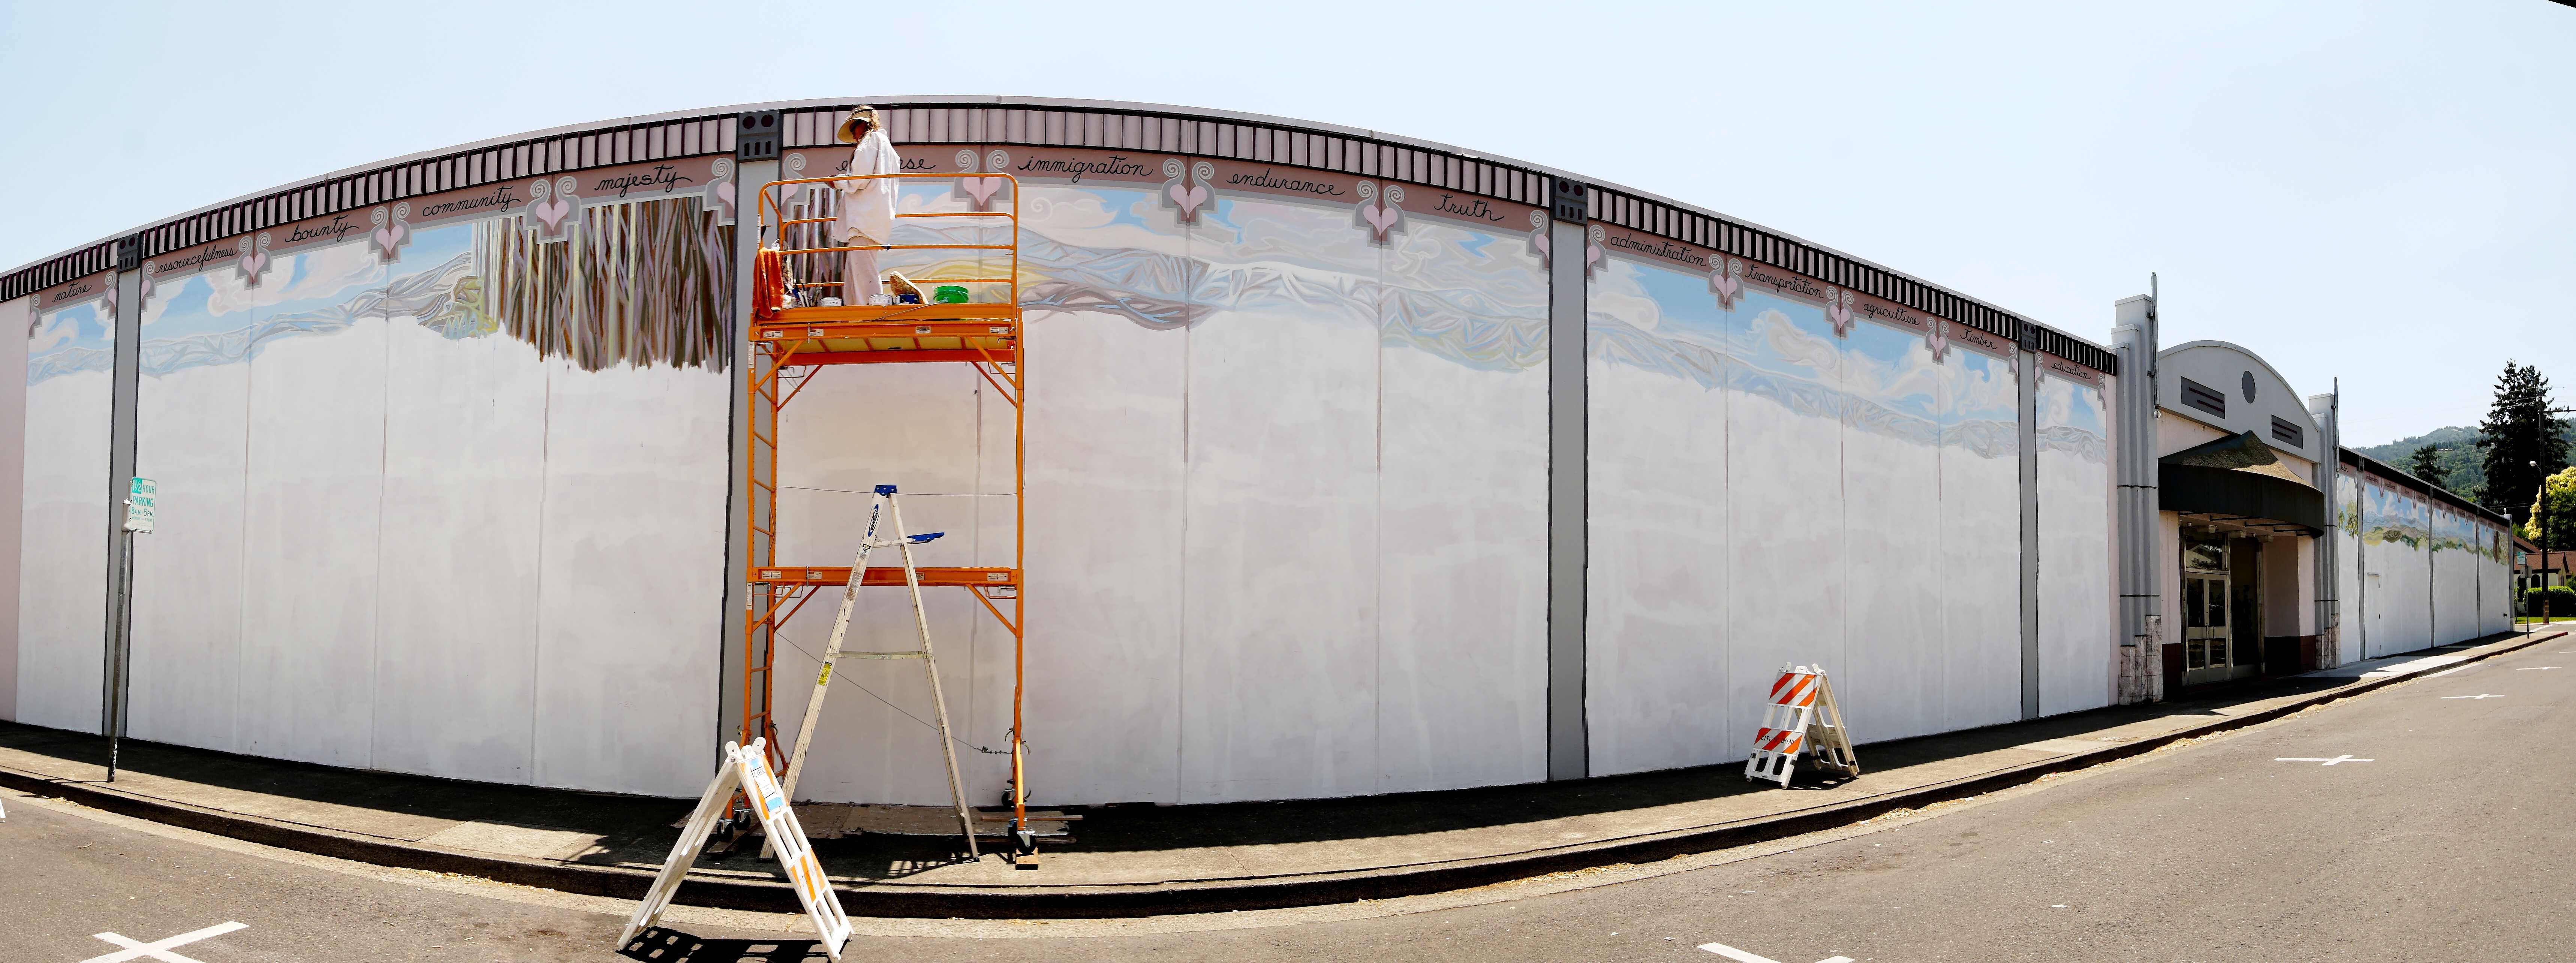 The Conference Center wall, at the beginning of the mural: double-level scaffolding!